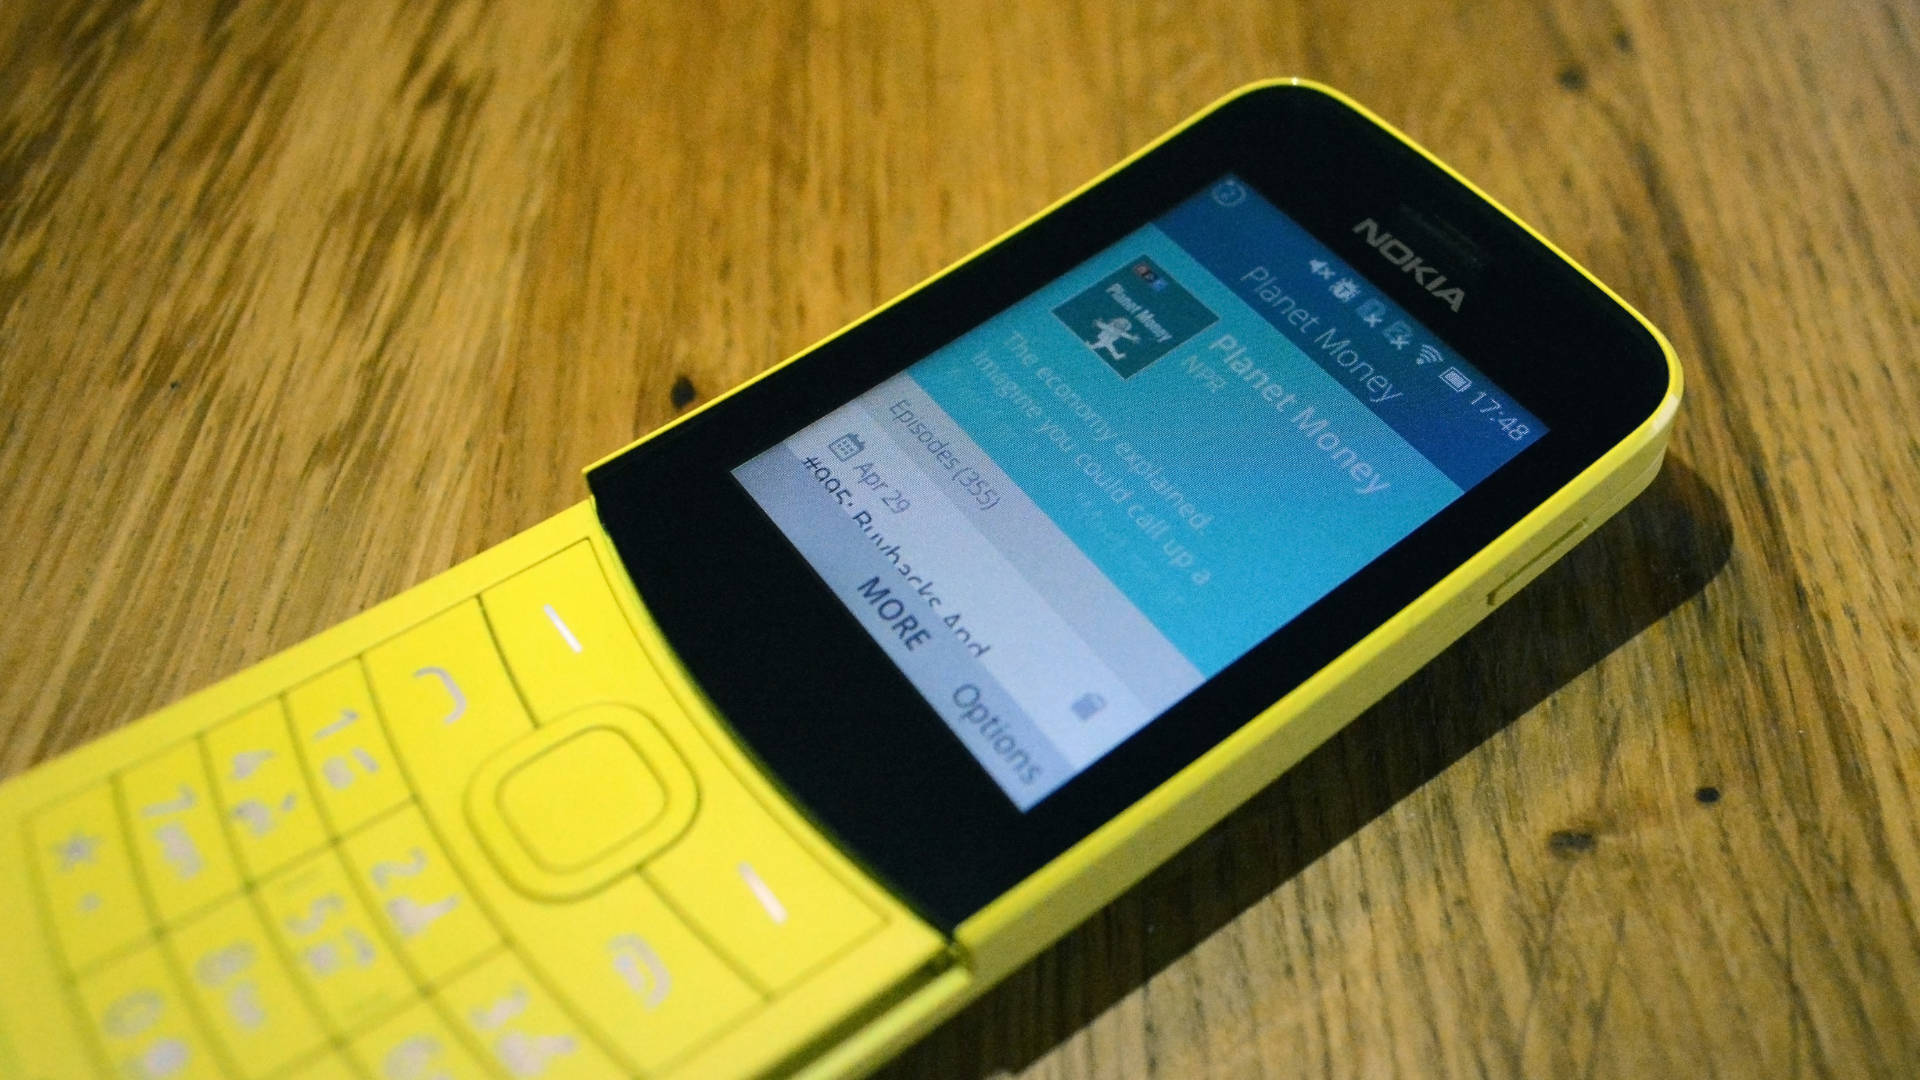 PodLP, a podcast app for KaiOS, aims to take podcasts to the next billion